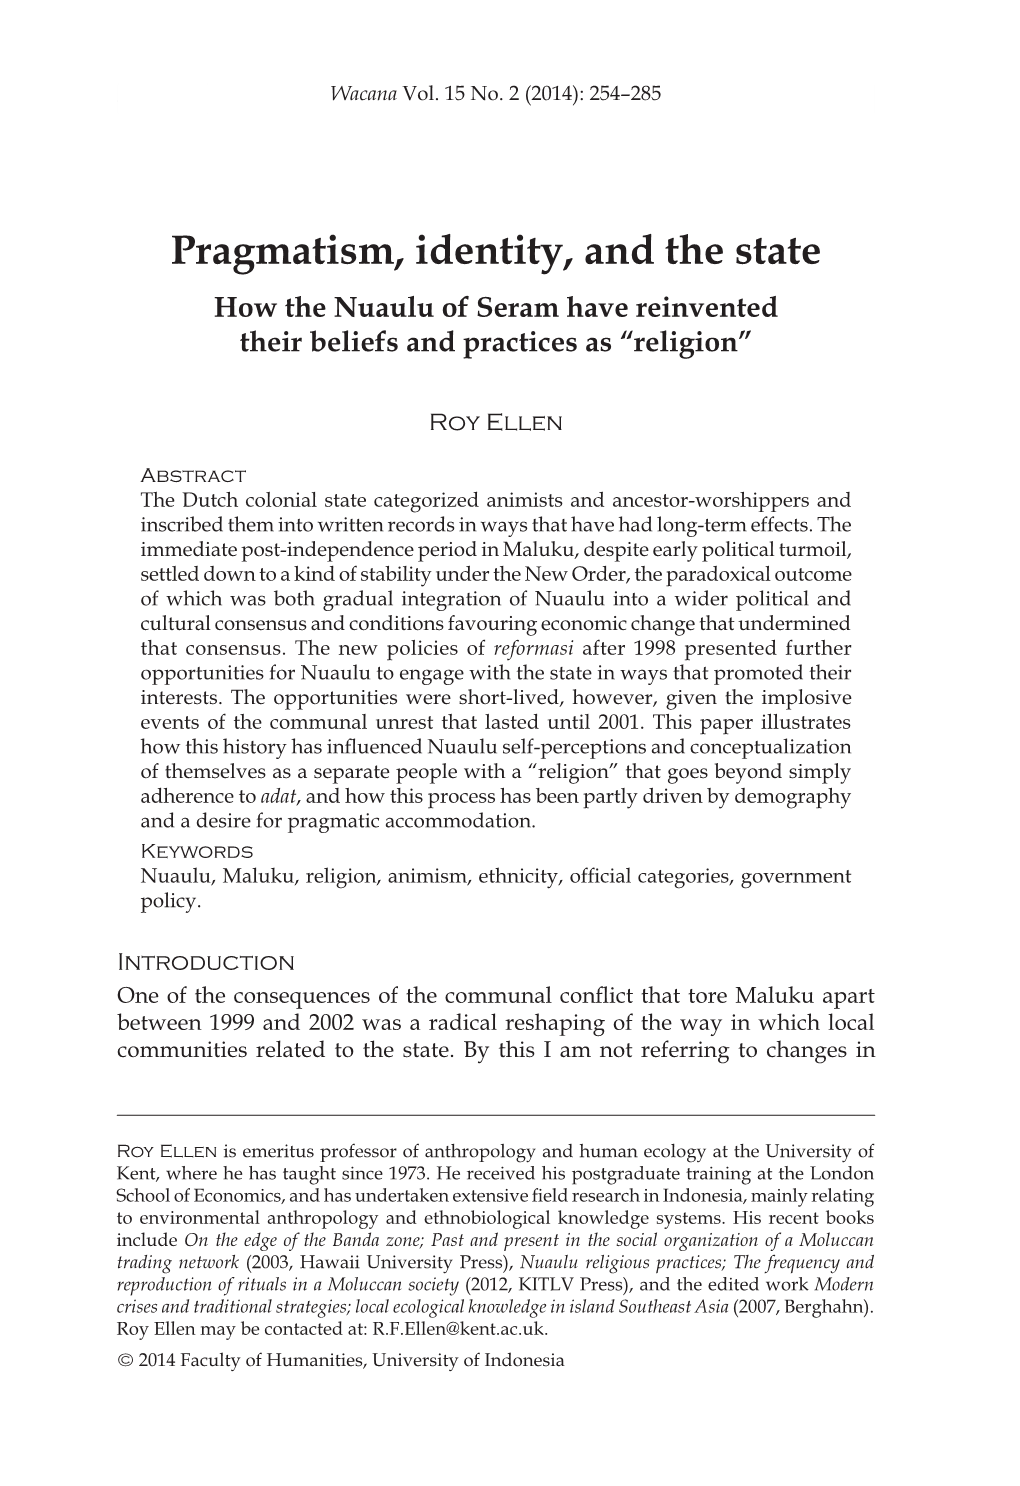 Pragmatism, Identity, and the State 255